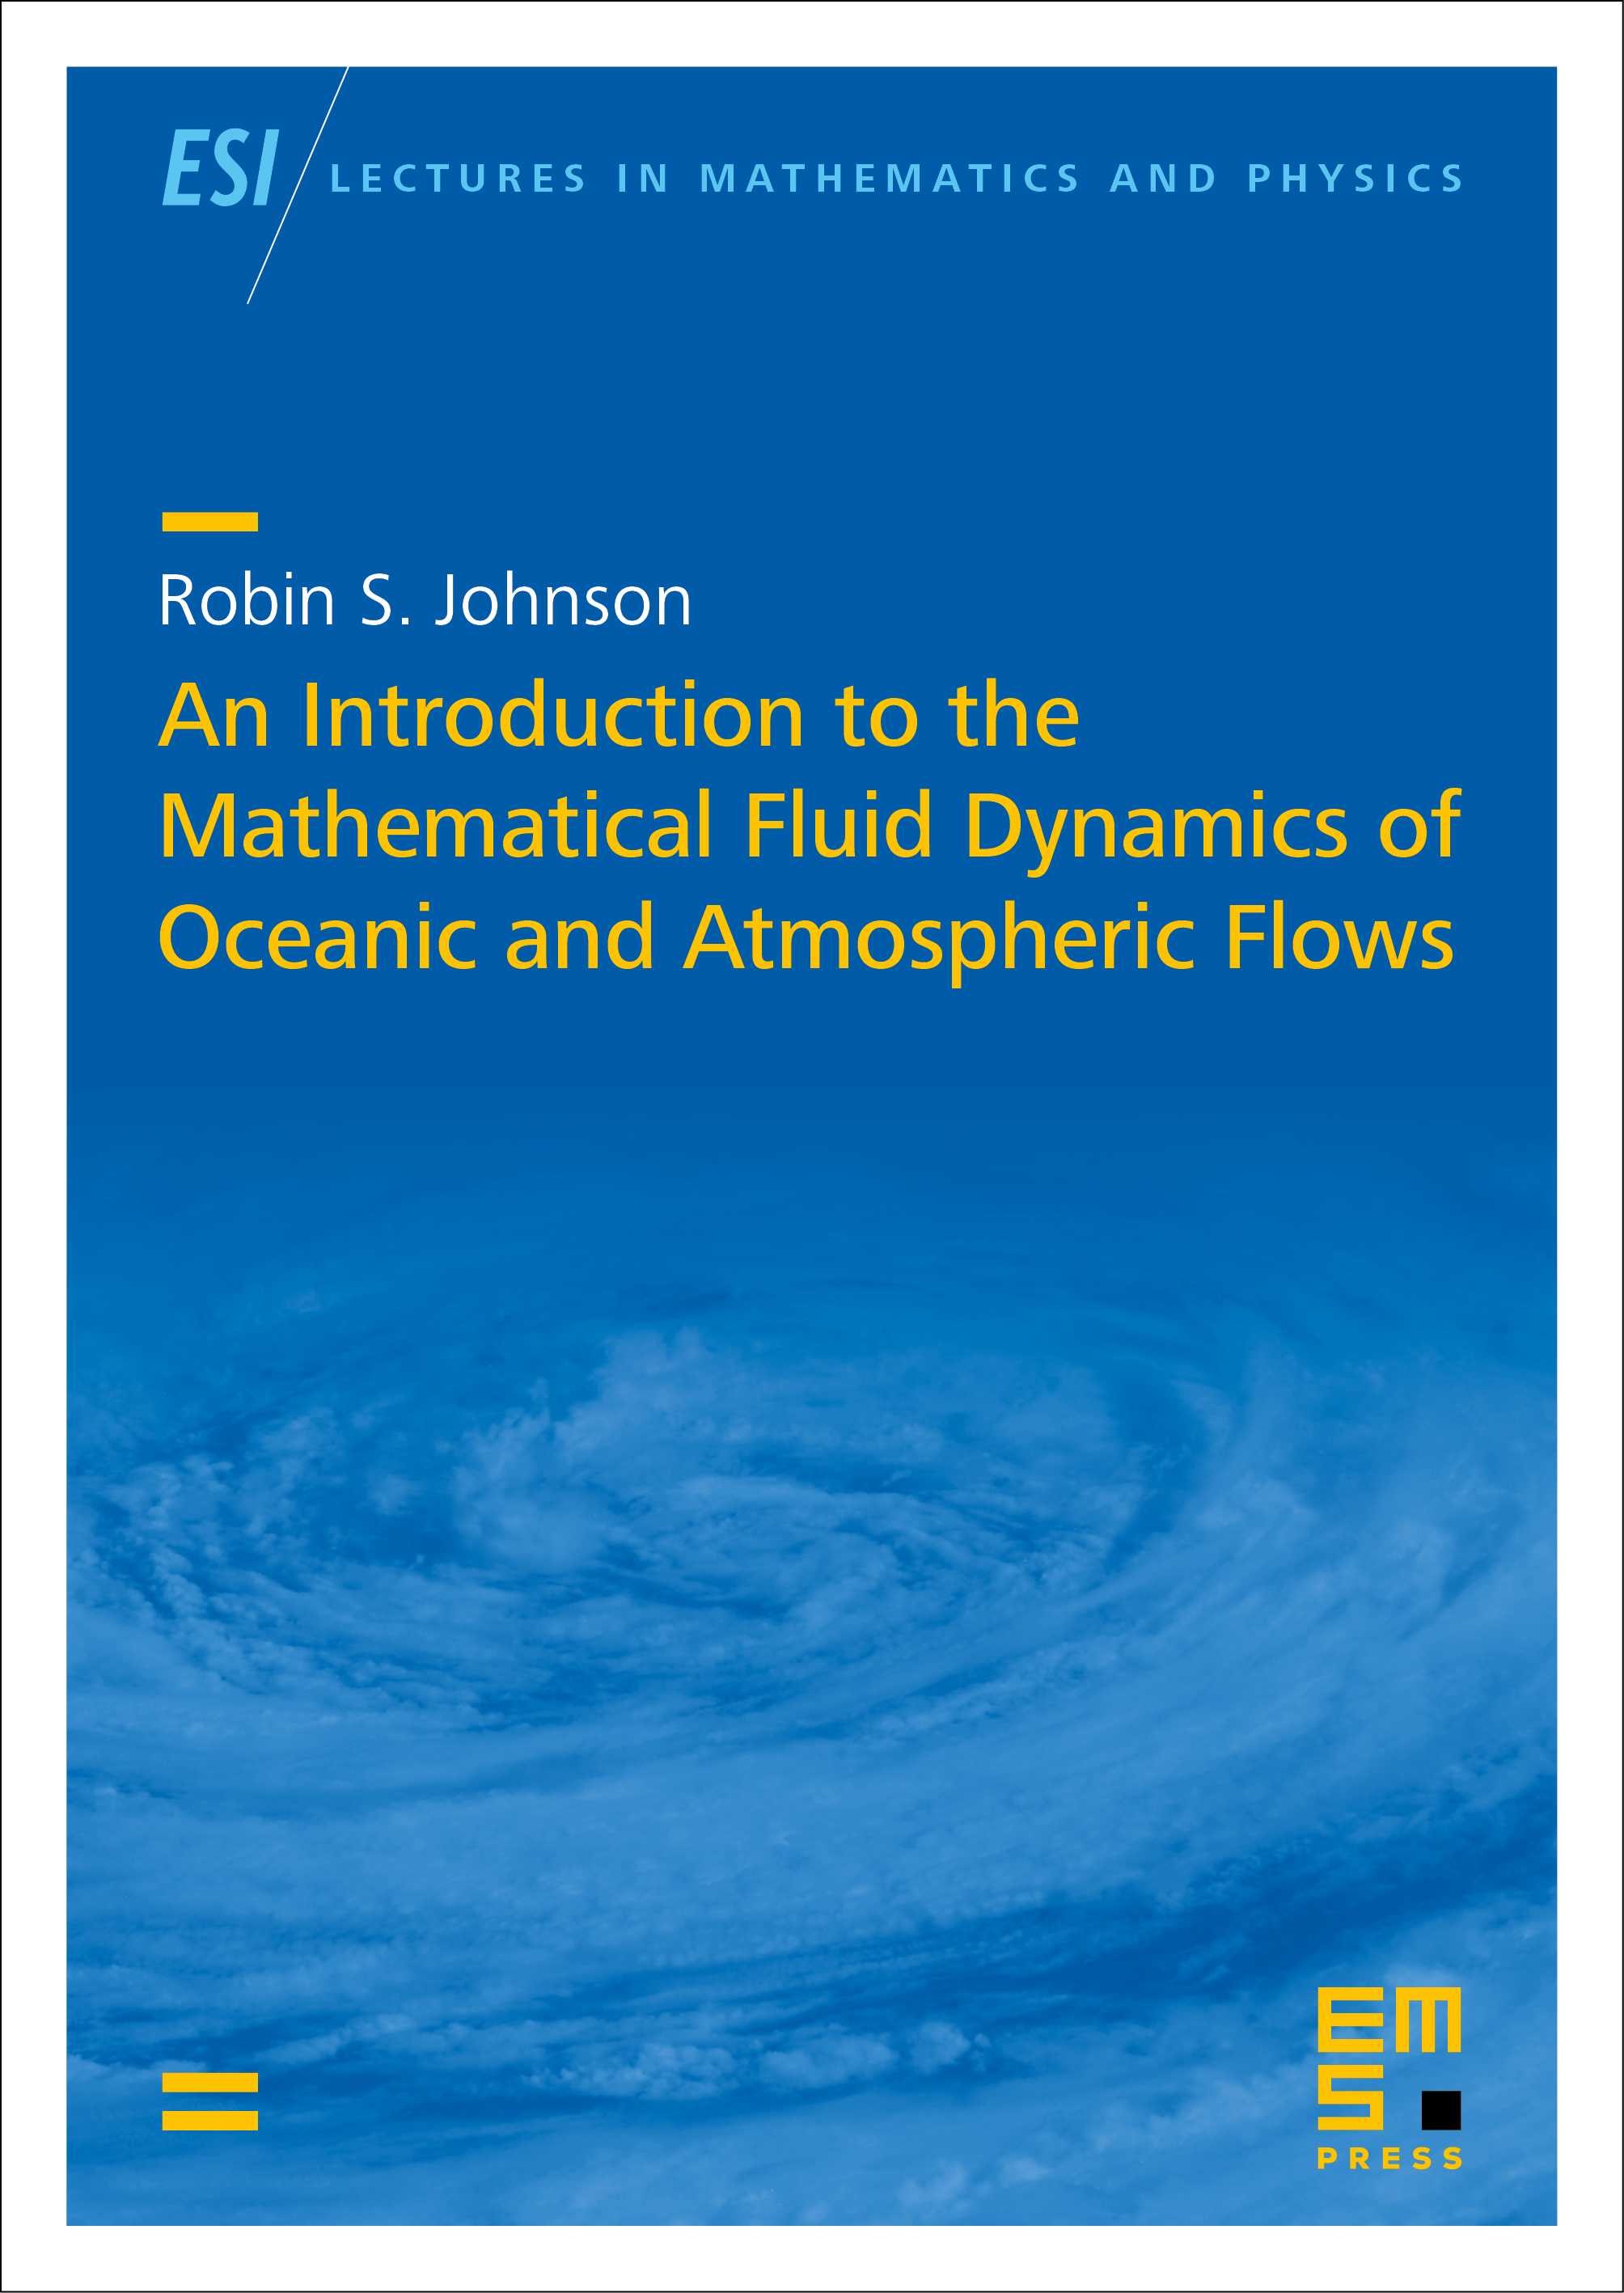 Oceanic flows cover